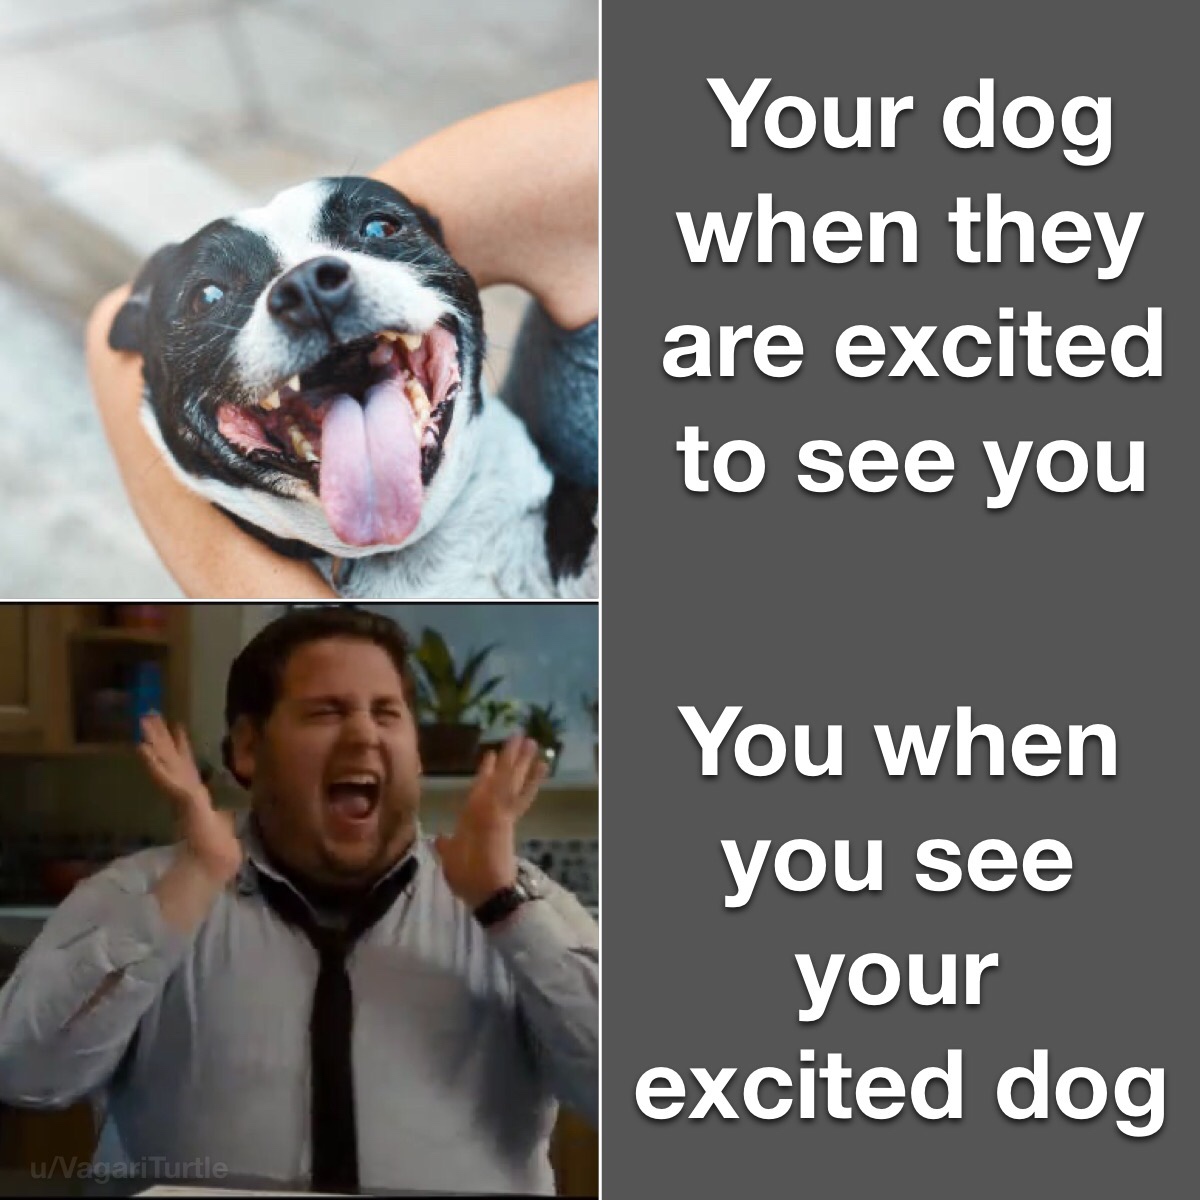 excited gif - Your dog when they are excited to see you You when you see your excited dog uVagari Turtle